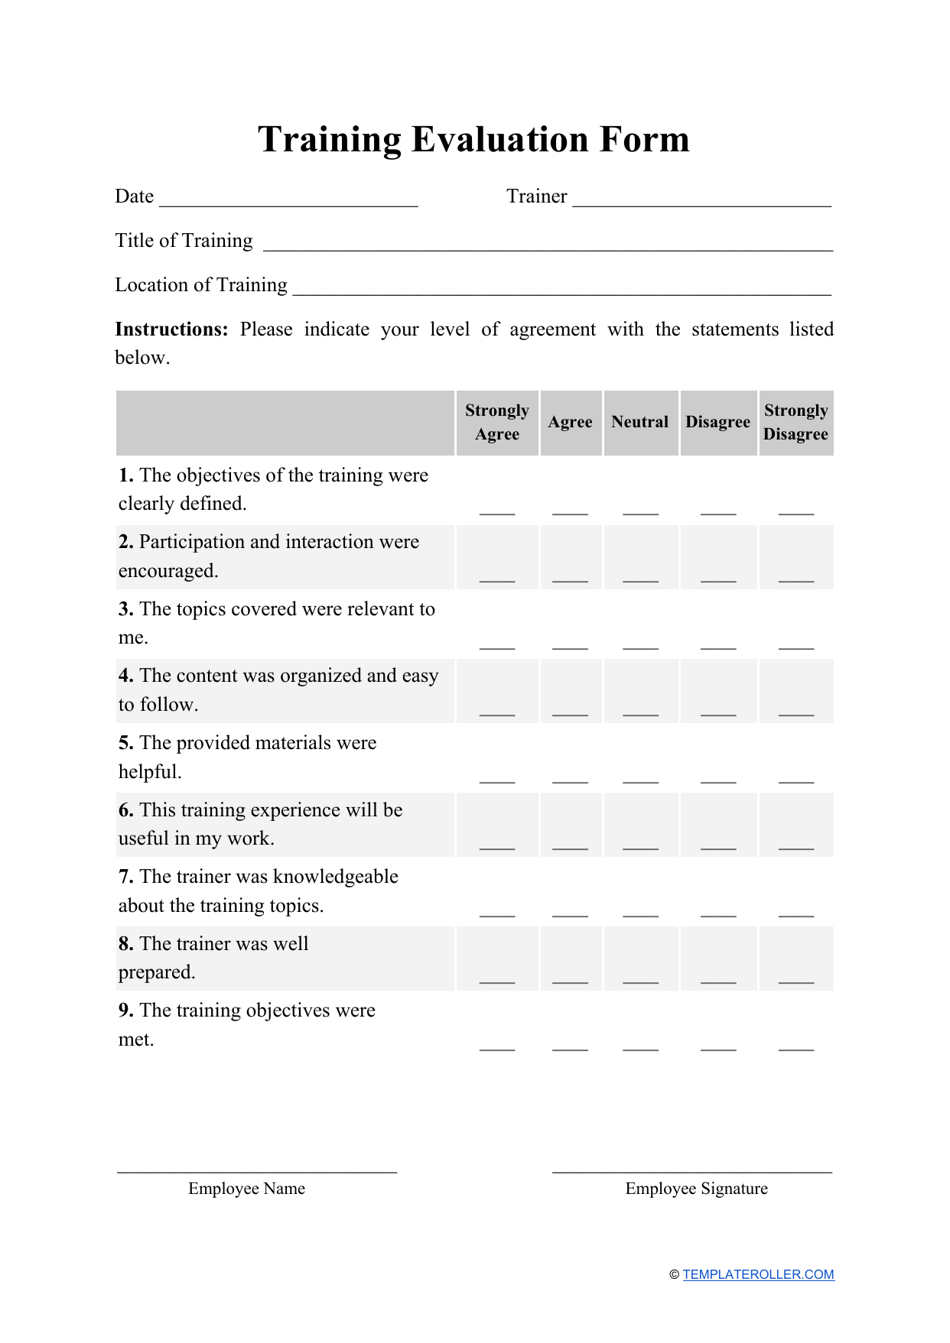 Training Evaluation Form Fill Out, Sign Online and Download PDF